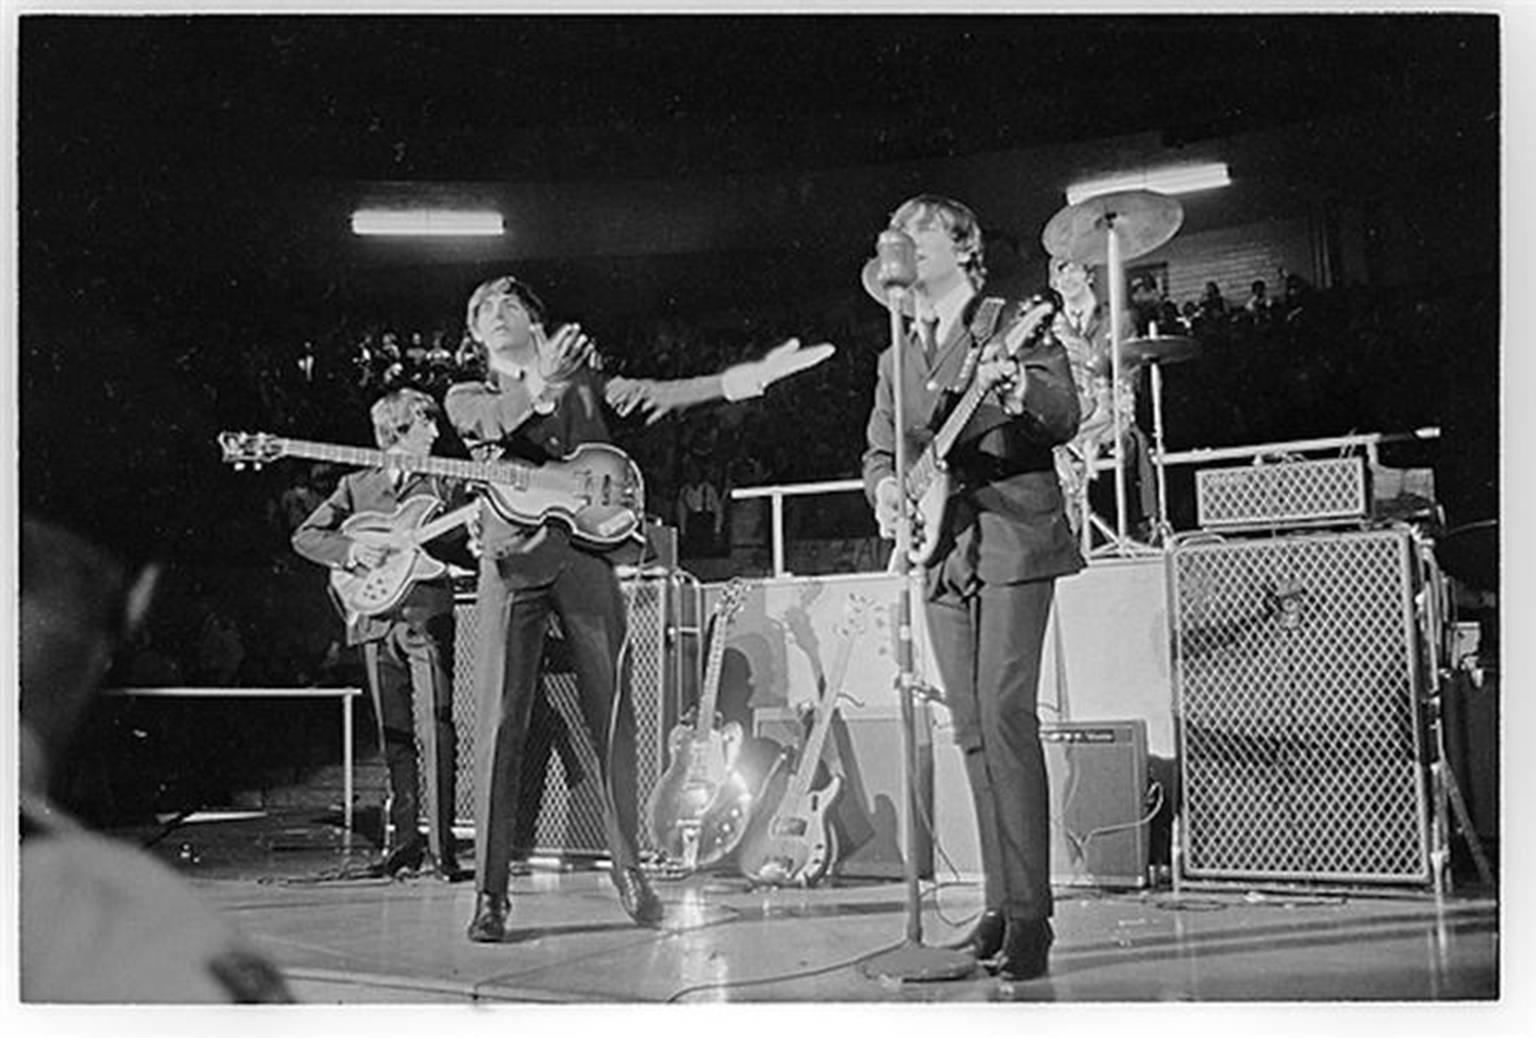 Curt Gunther Black and White Photograph - The Beatles on Stage